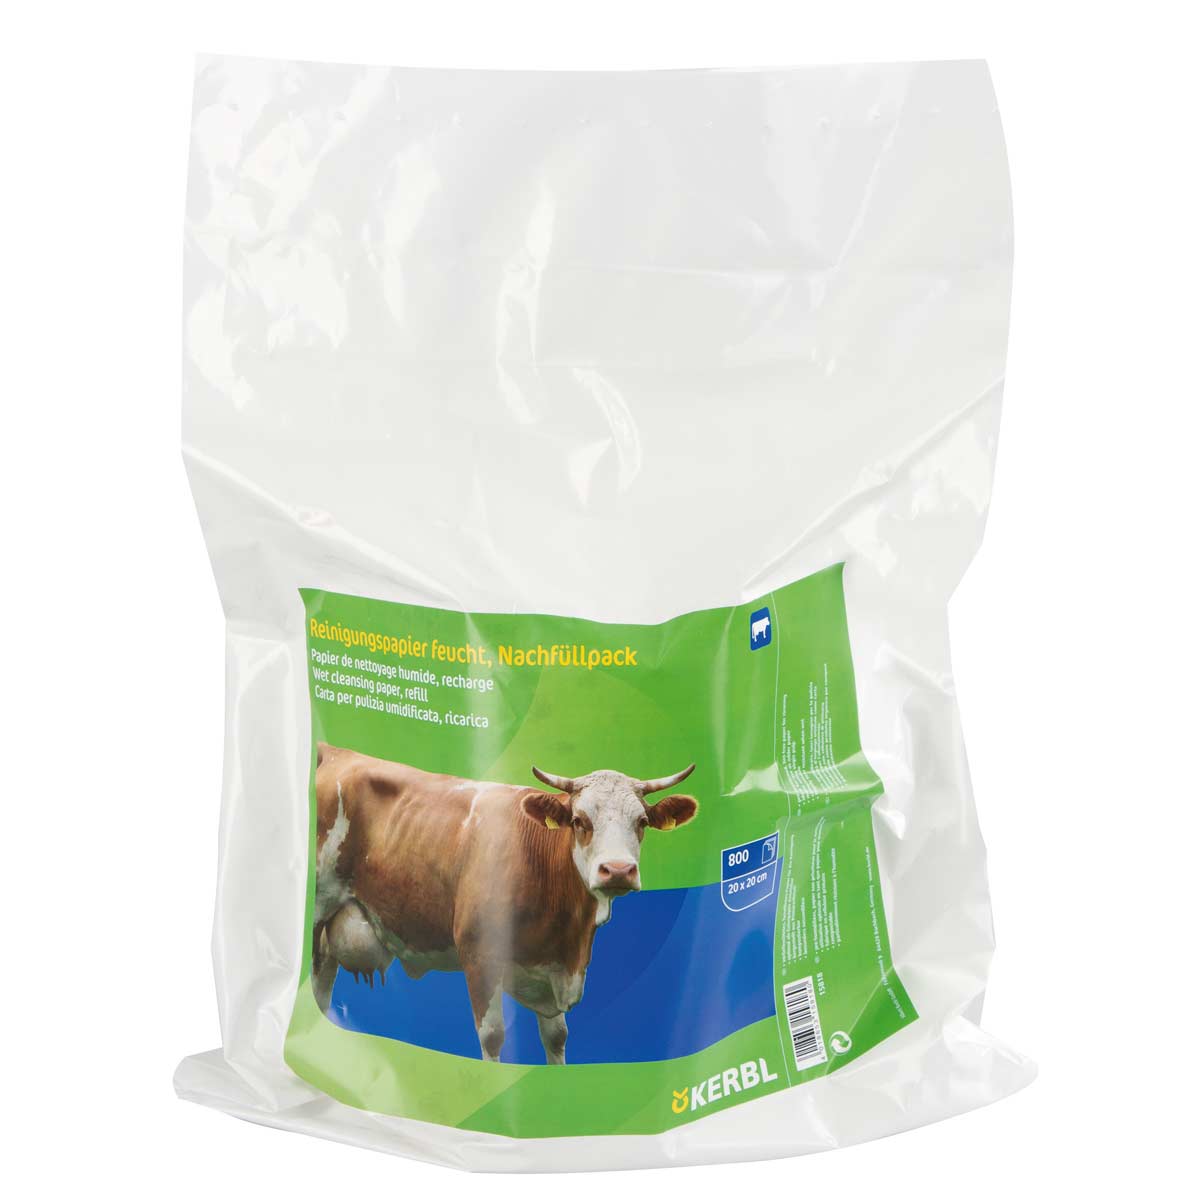 Udder towels wet refill package 800 towels